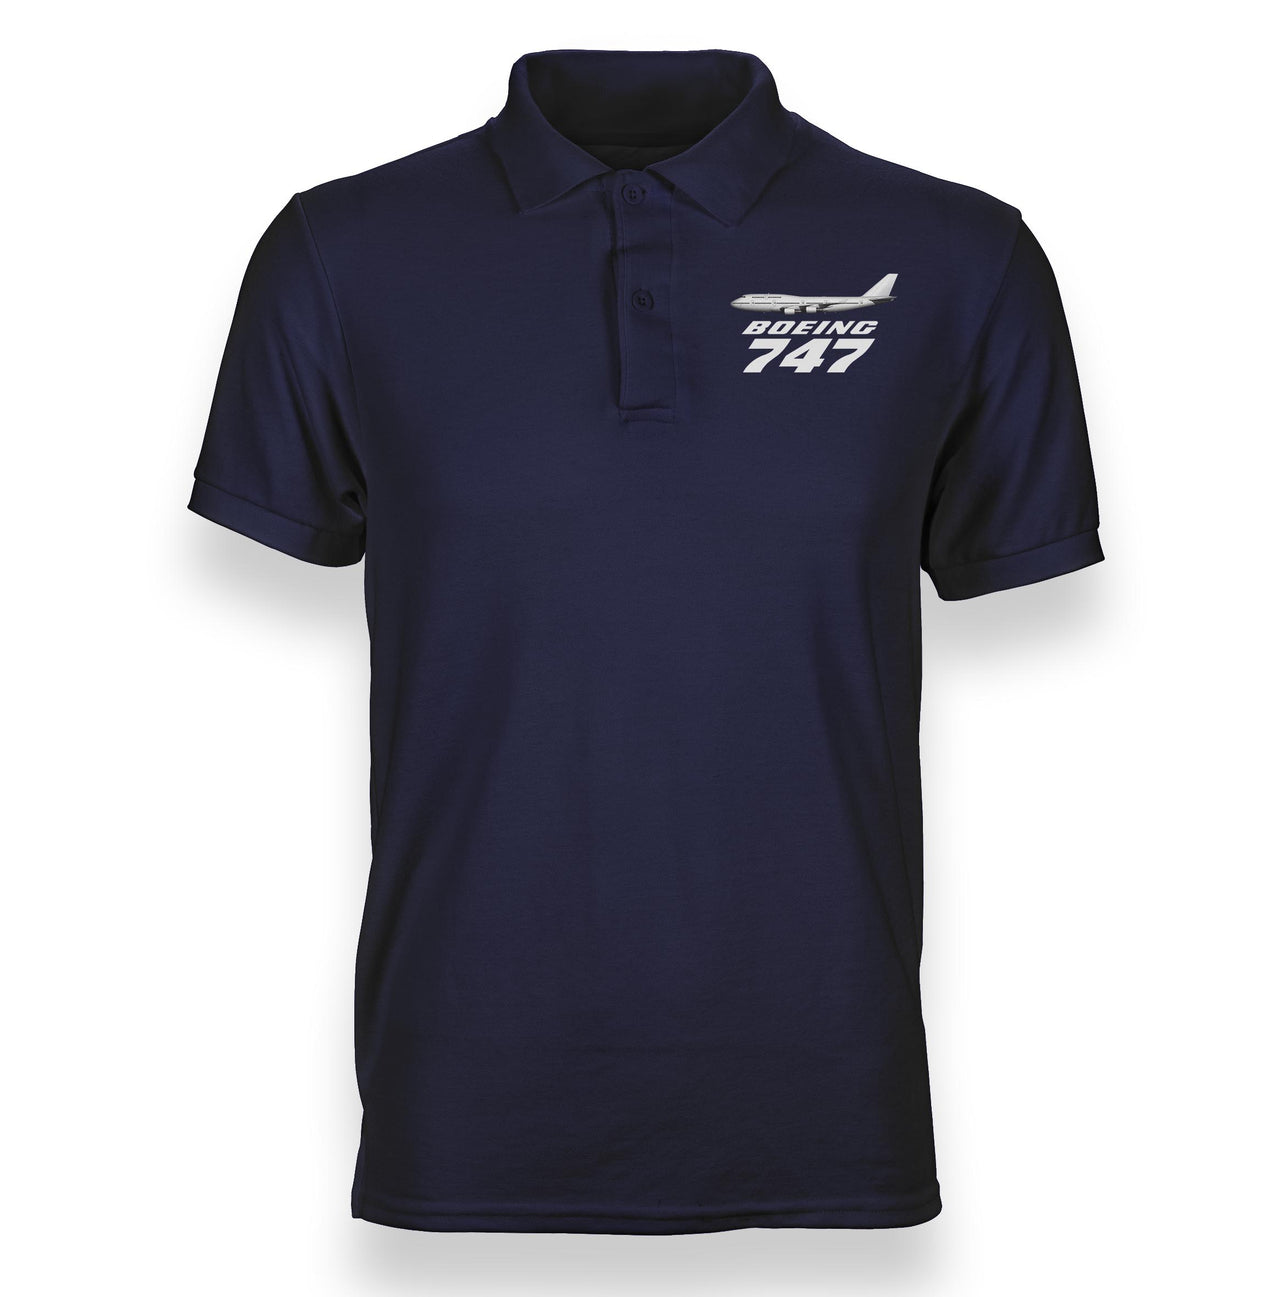 The Boeing 747 Designed Polo T-Shirts